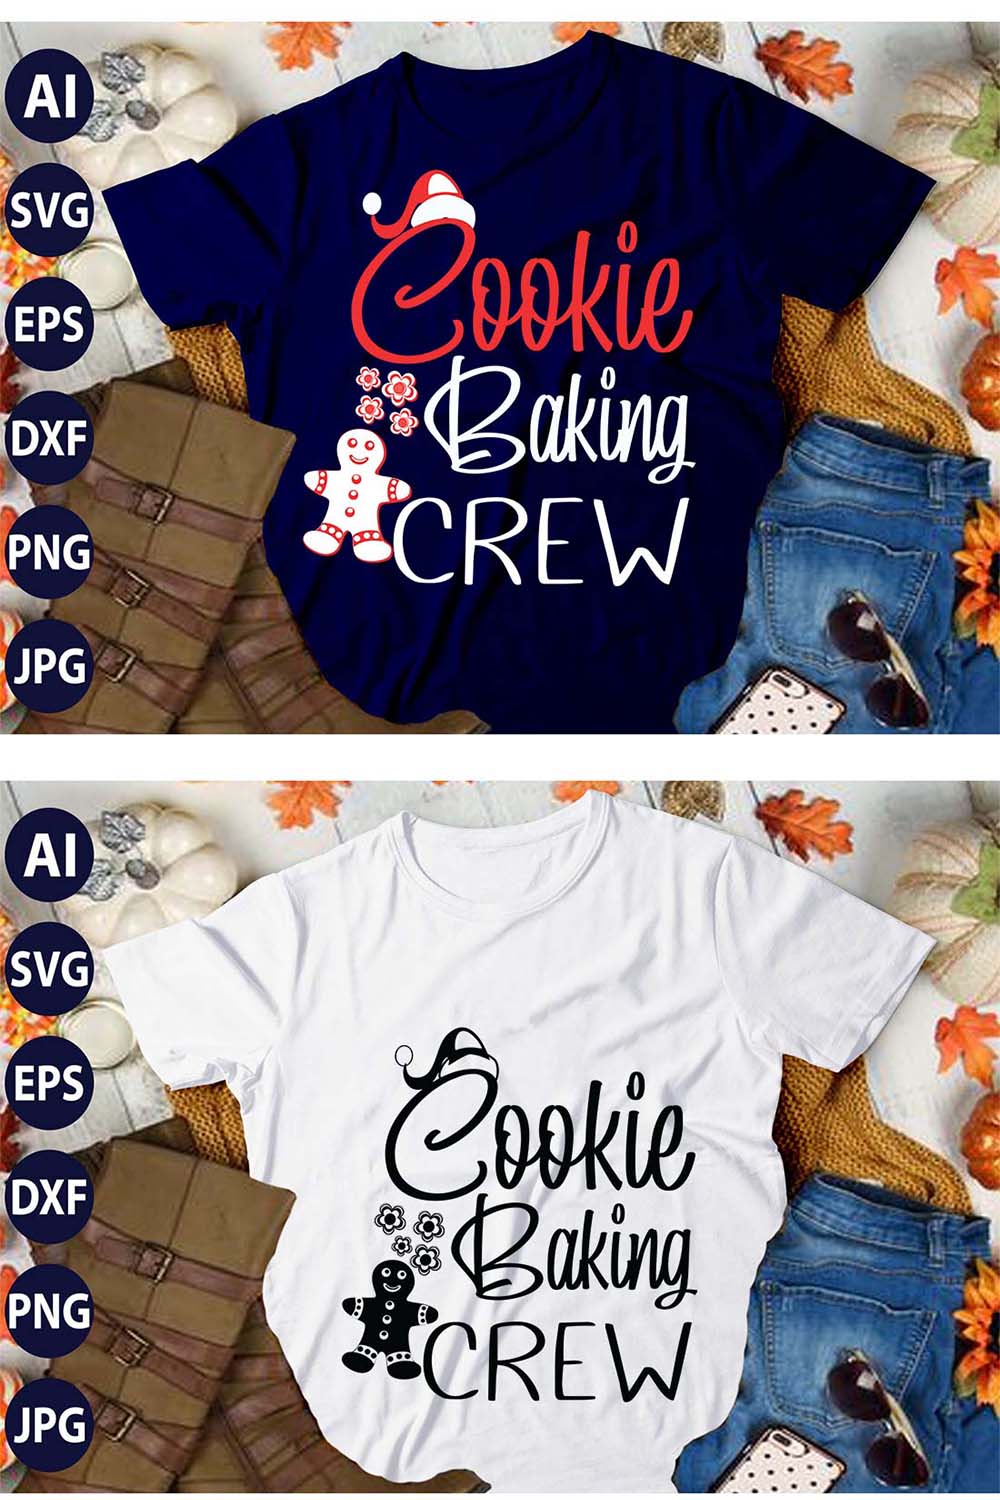 Cookie Baking Crew, SVG T-Shirt Design |Christmas Retro It's All About Jesus Typography Tshirt Design | Ai, Svg, Eps, Dxf, Jpeg, Png, Instant download T-Shirt | 100% print-ready Digital vector file pinterest preview image.